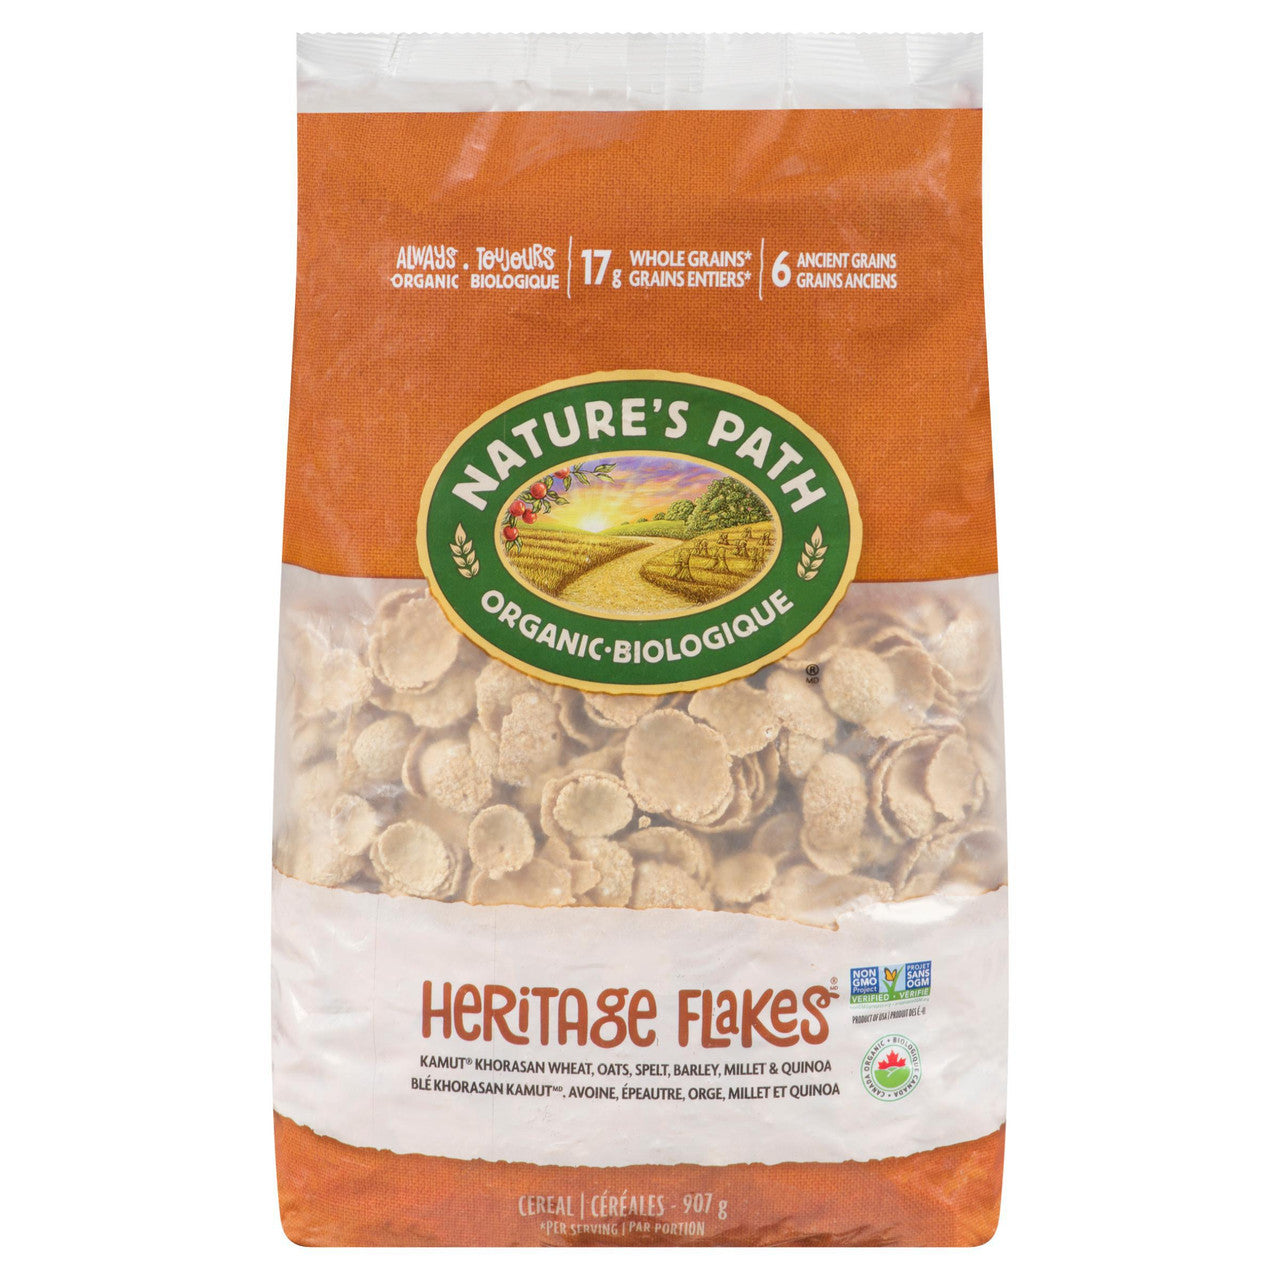 Nature's Path Organic Heritage Flakes Cereal, 907g/2 lbs. Bag {Imported from Canada}